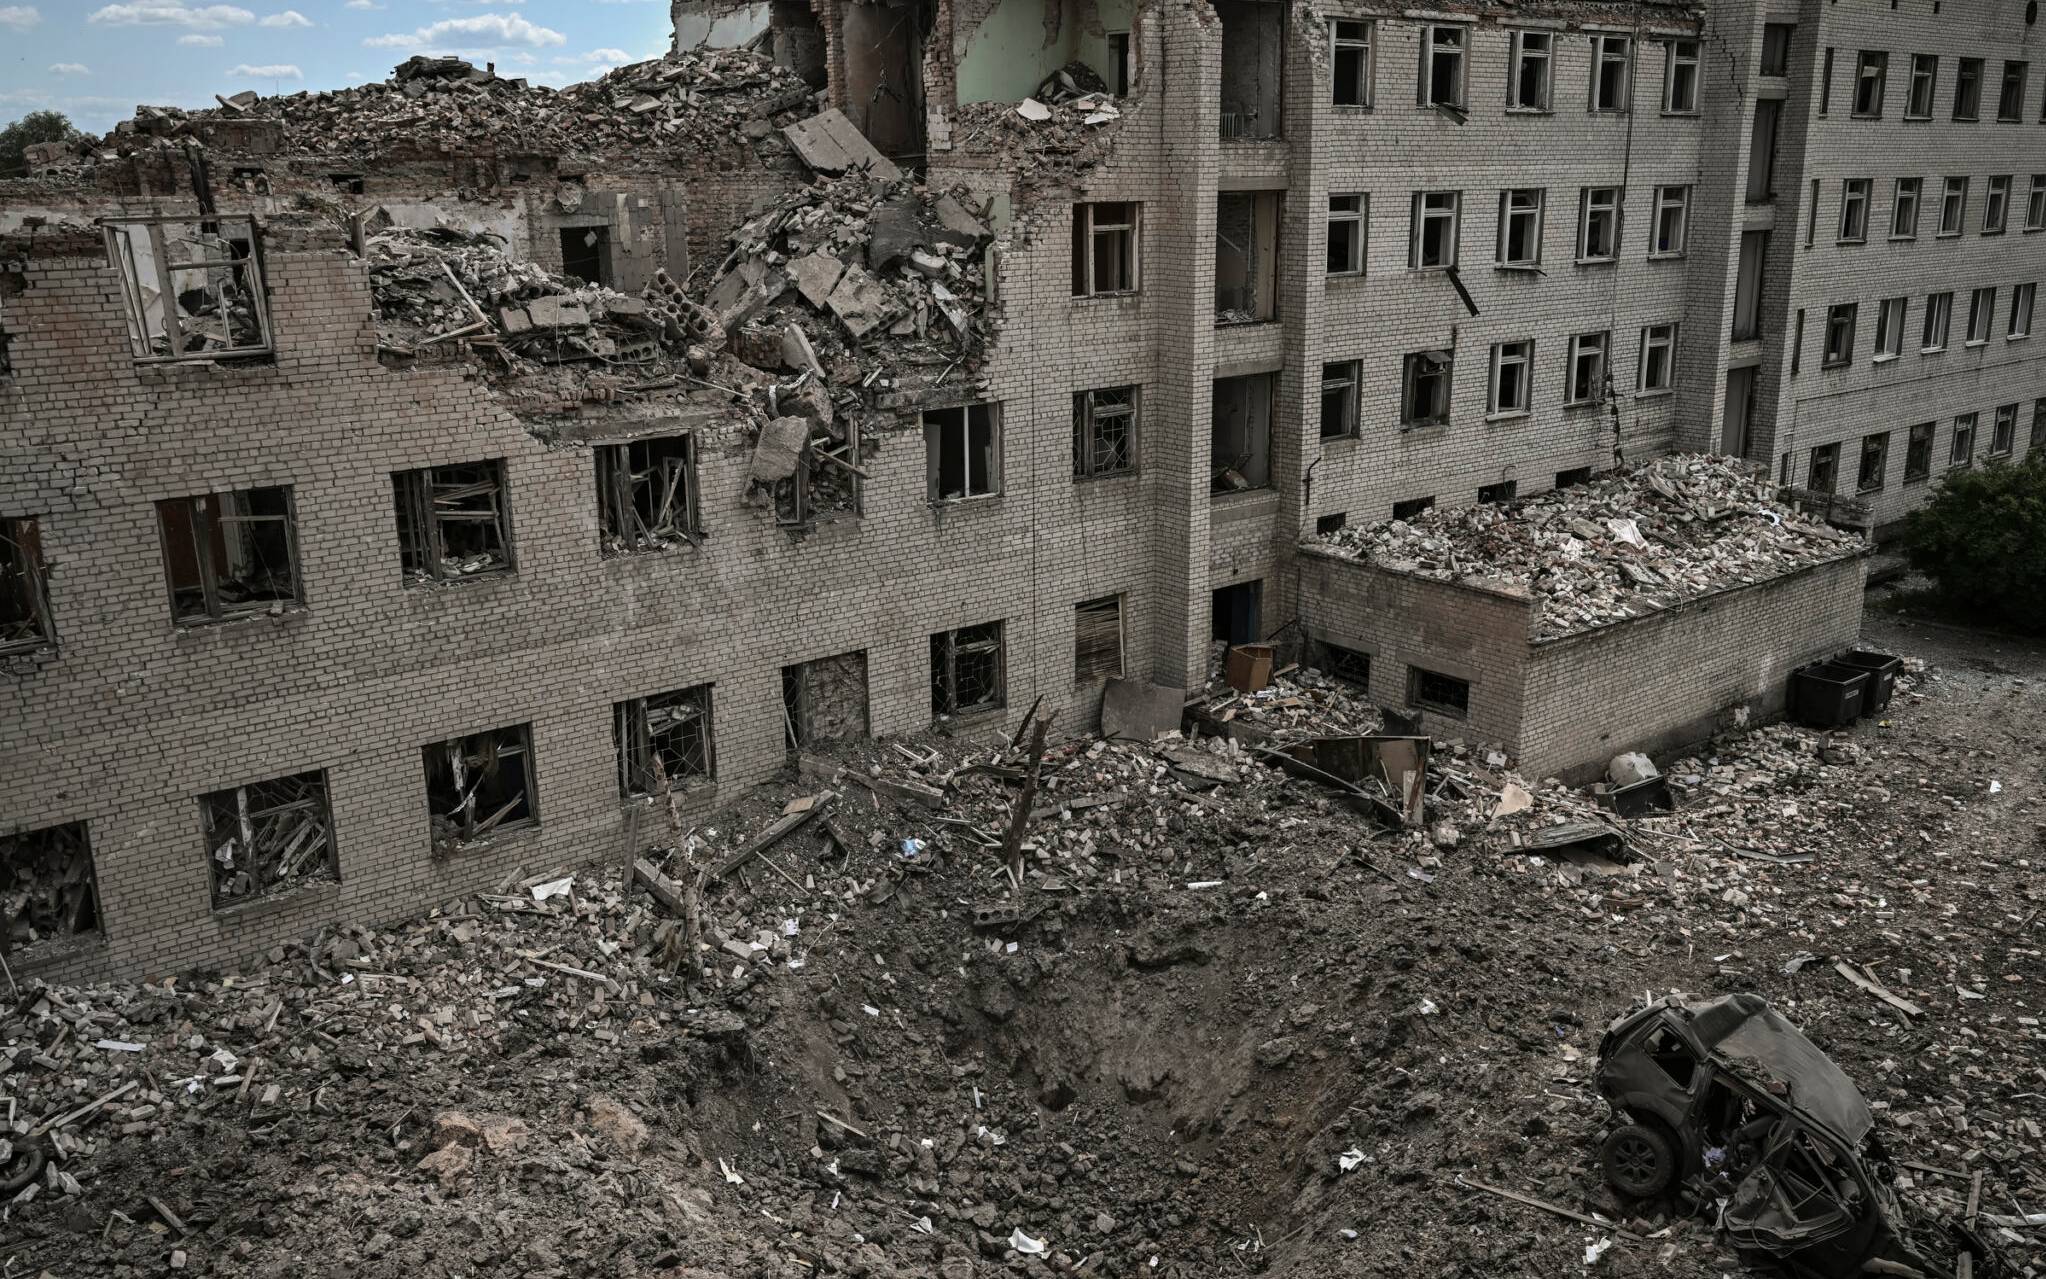 This photograph taken on May 25, 2022 shows destroyed administration building in the city of Bakhmut in the eastern Ukranian region of Donbas. (Photo by ARIS MESSINIS / AFP)